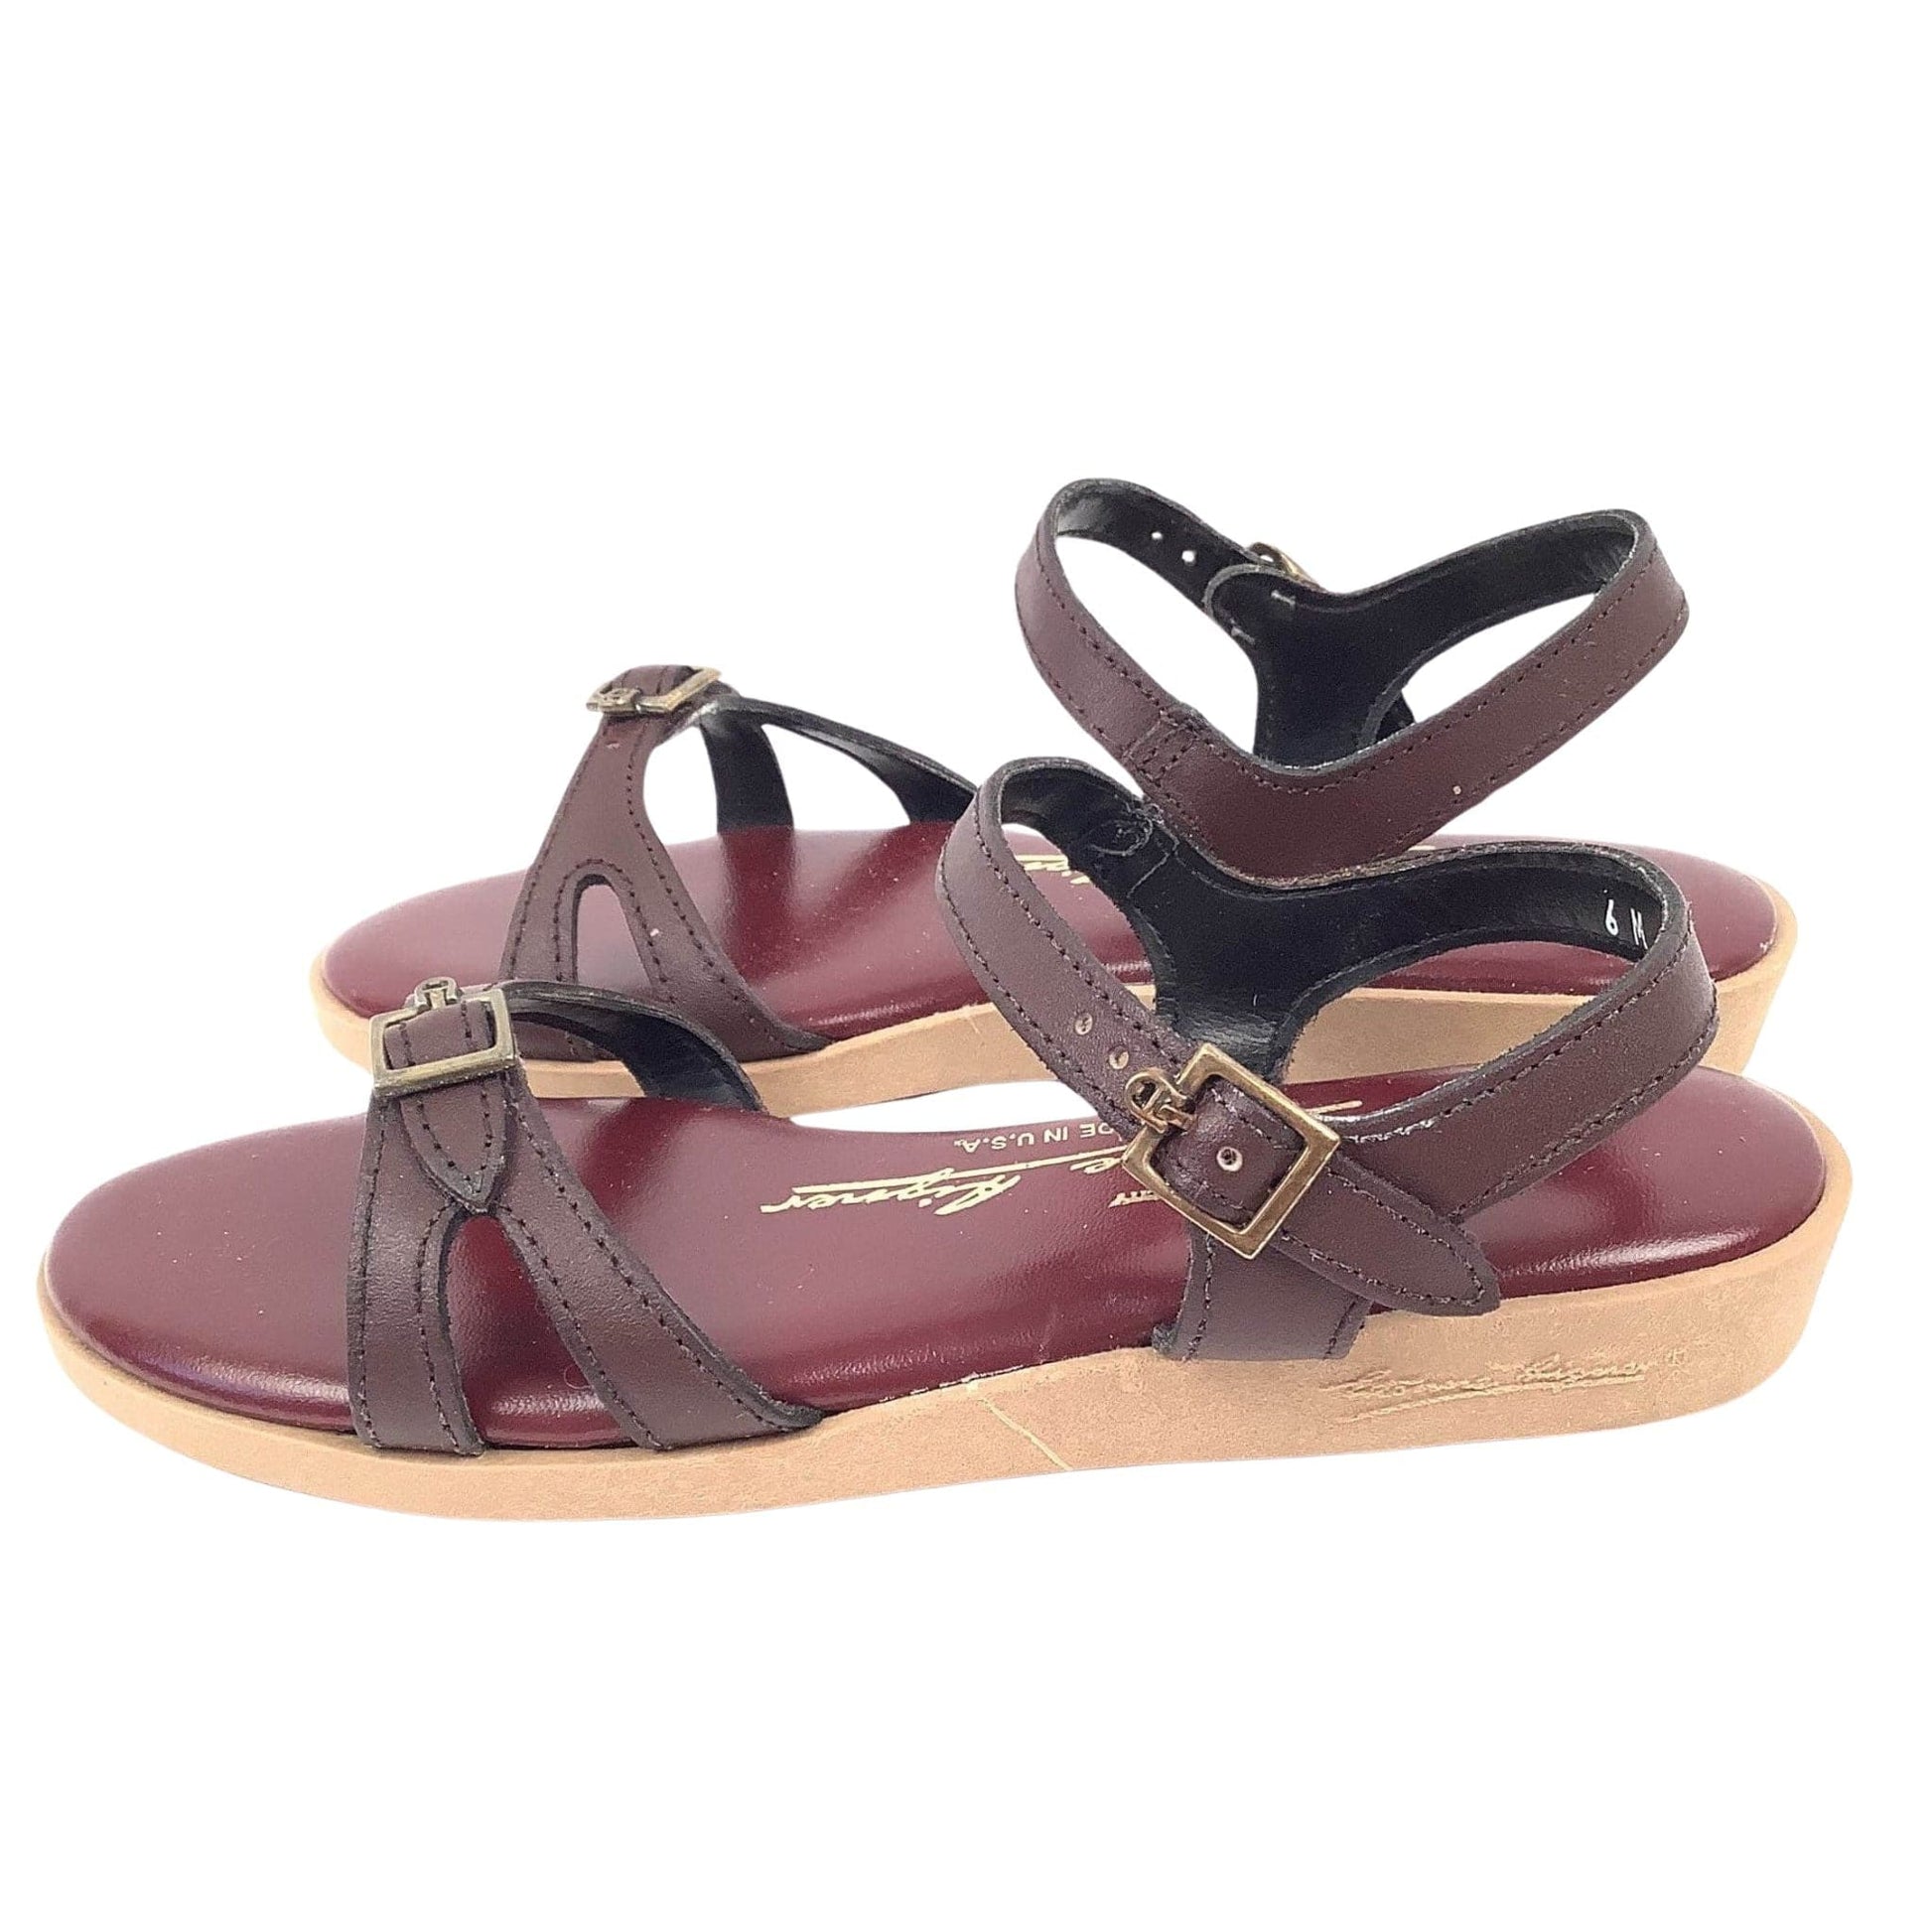 Aigner Flat Strappy Sandals 8 / Leather / Classic